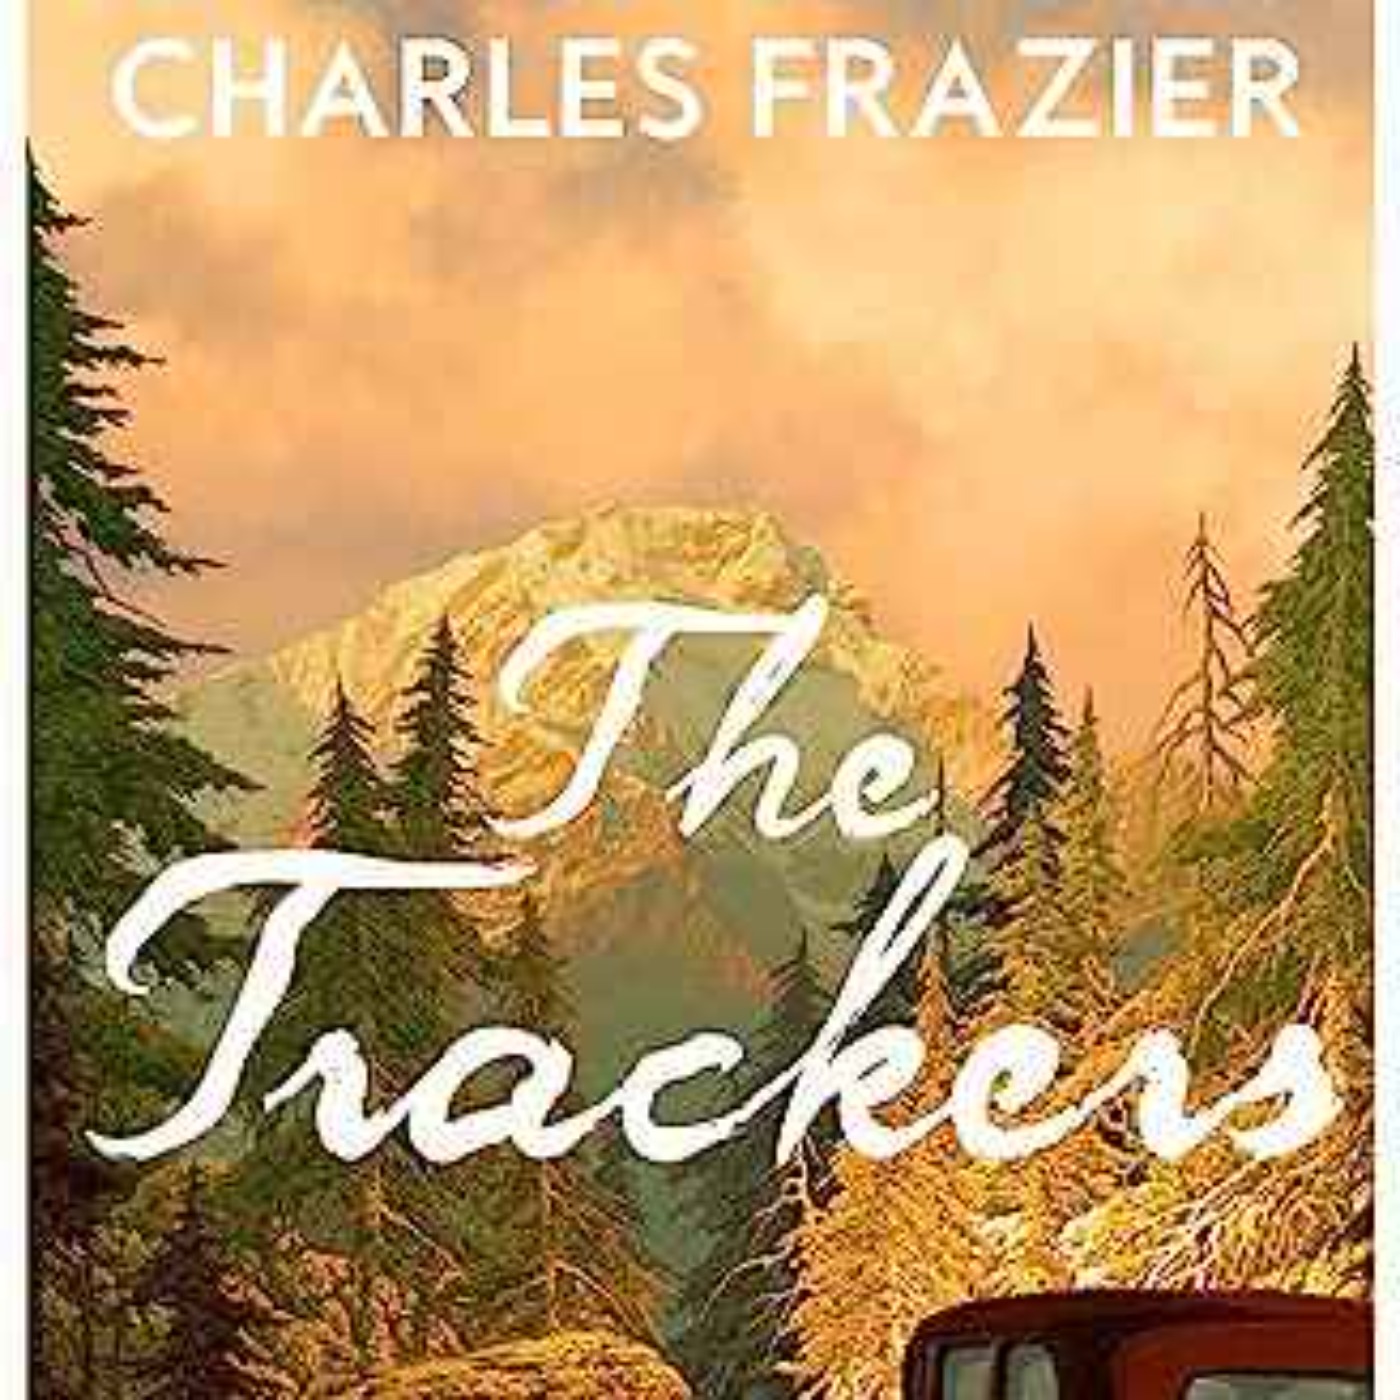 Little Atoms 842 - Charles Frazier's The Trackers